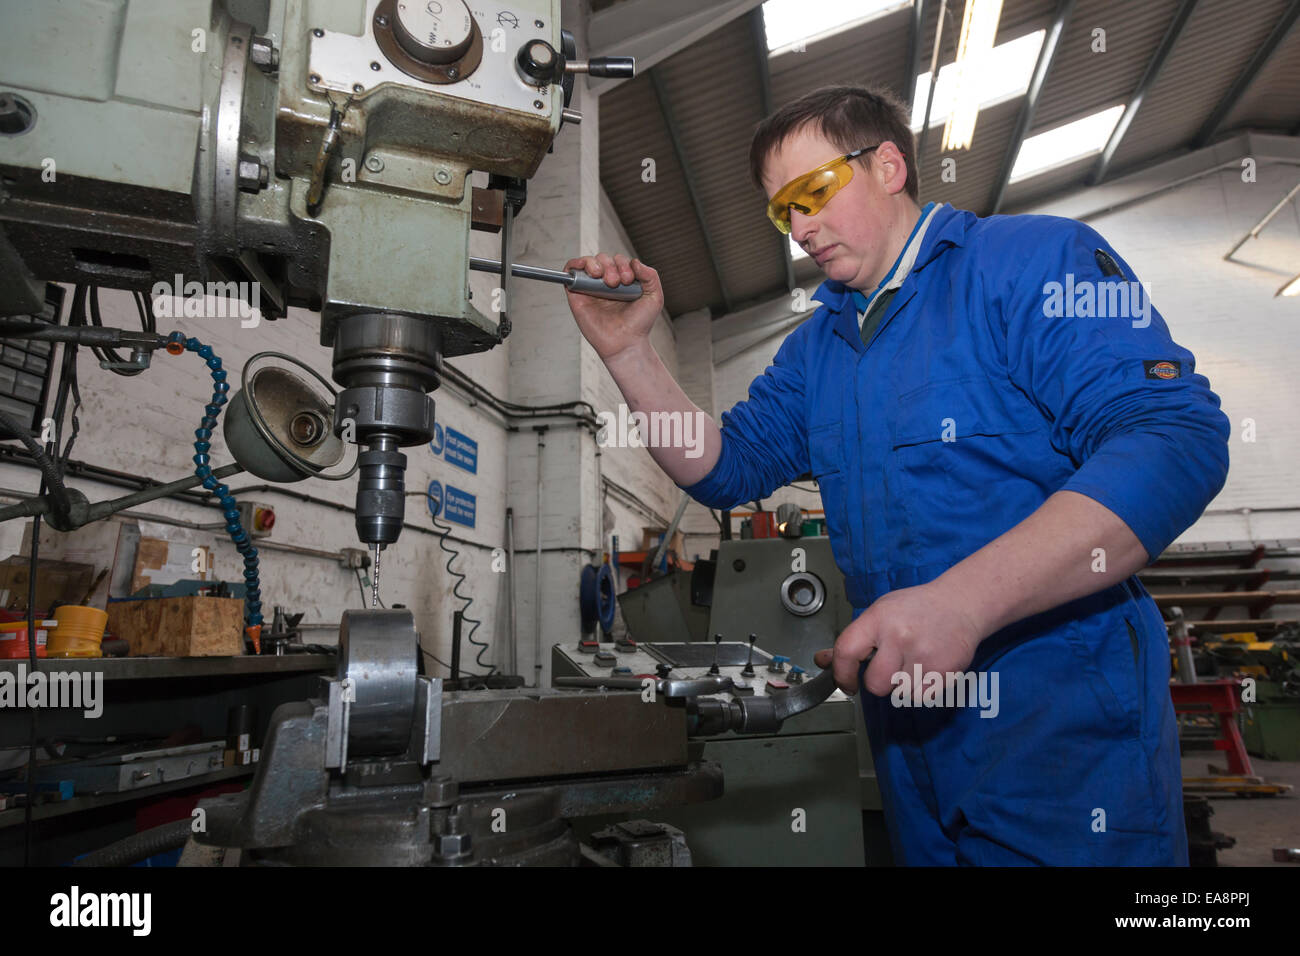 Engineer on a drilling machine tool used in the manufacture of hydraulic parts Stock Photo